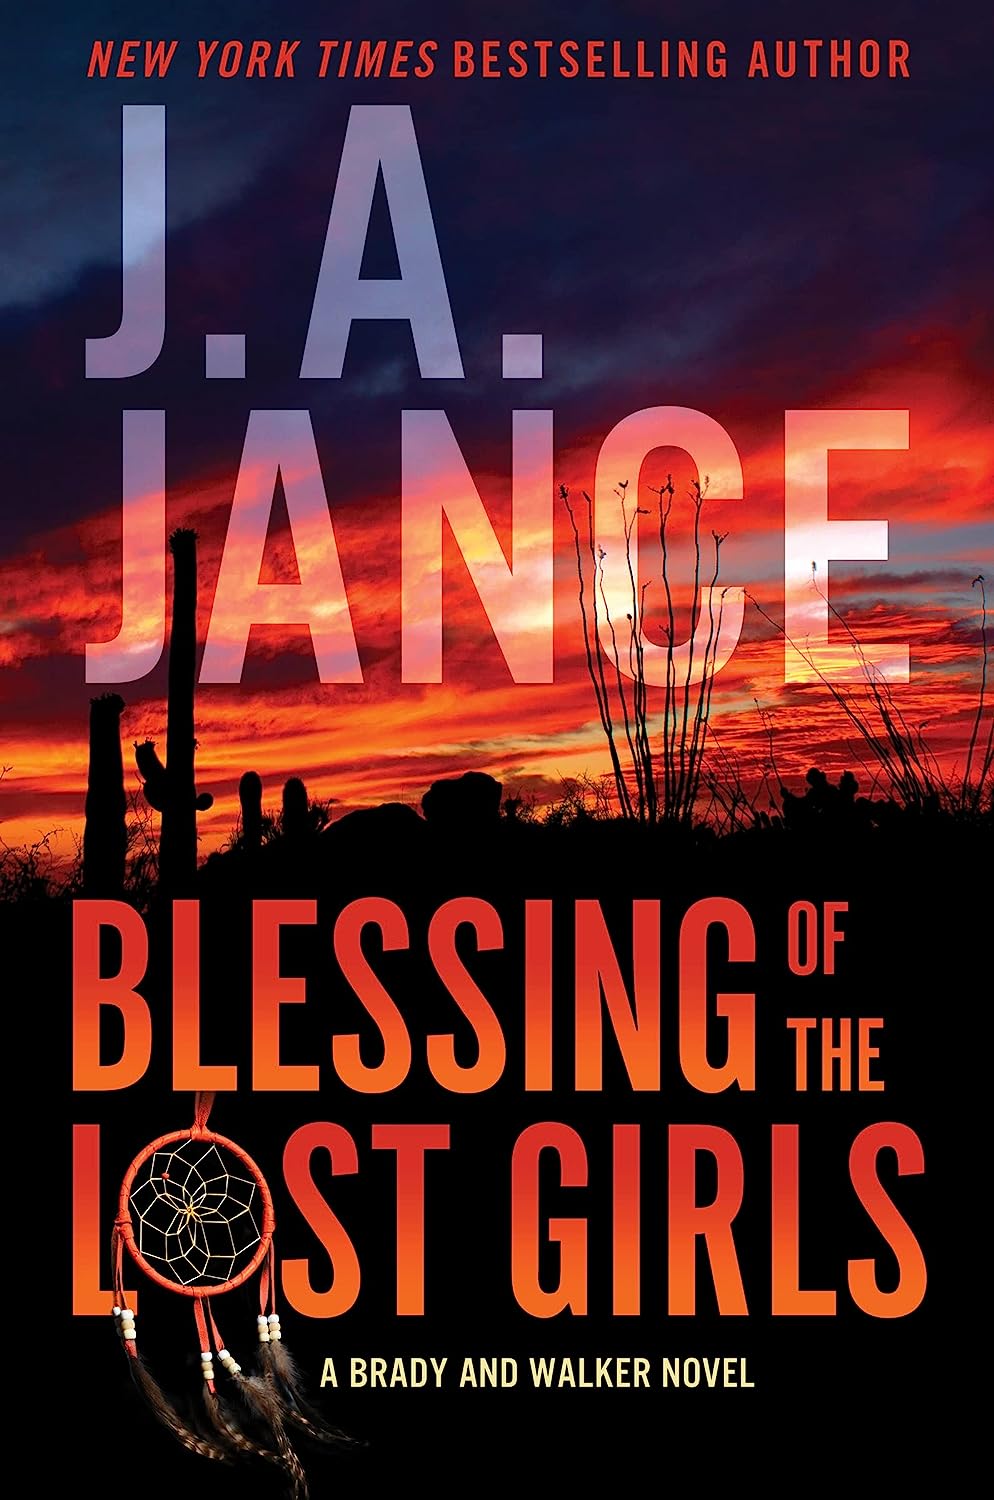 Image for "Blessing of the Lost Girls"